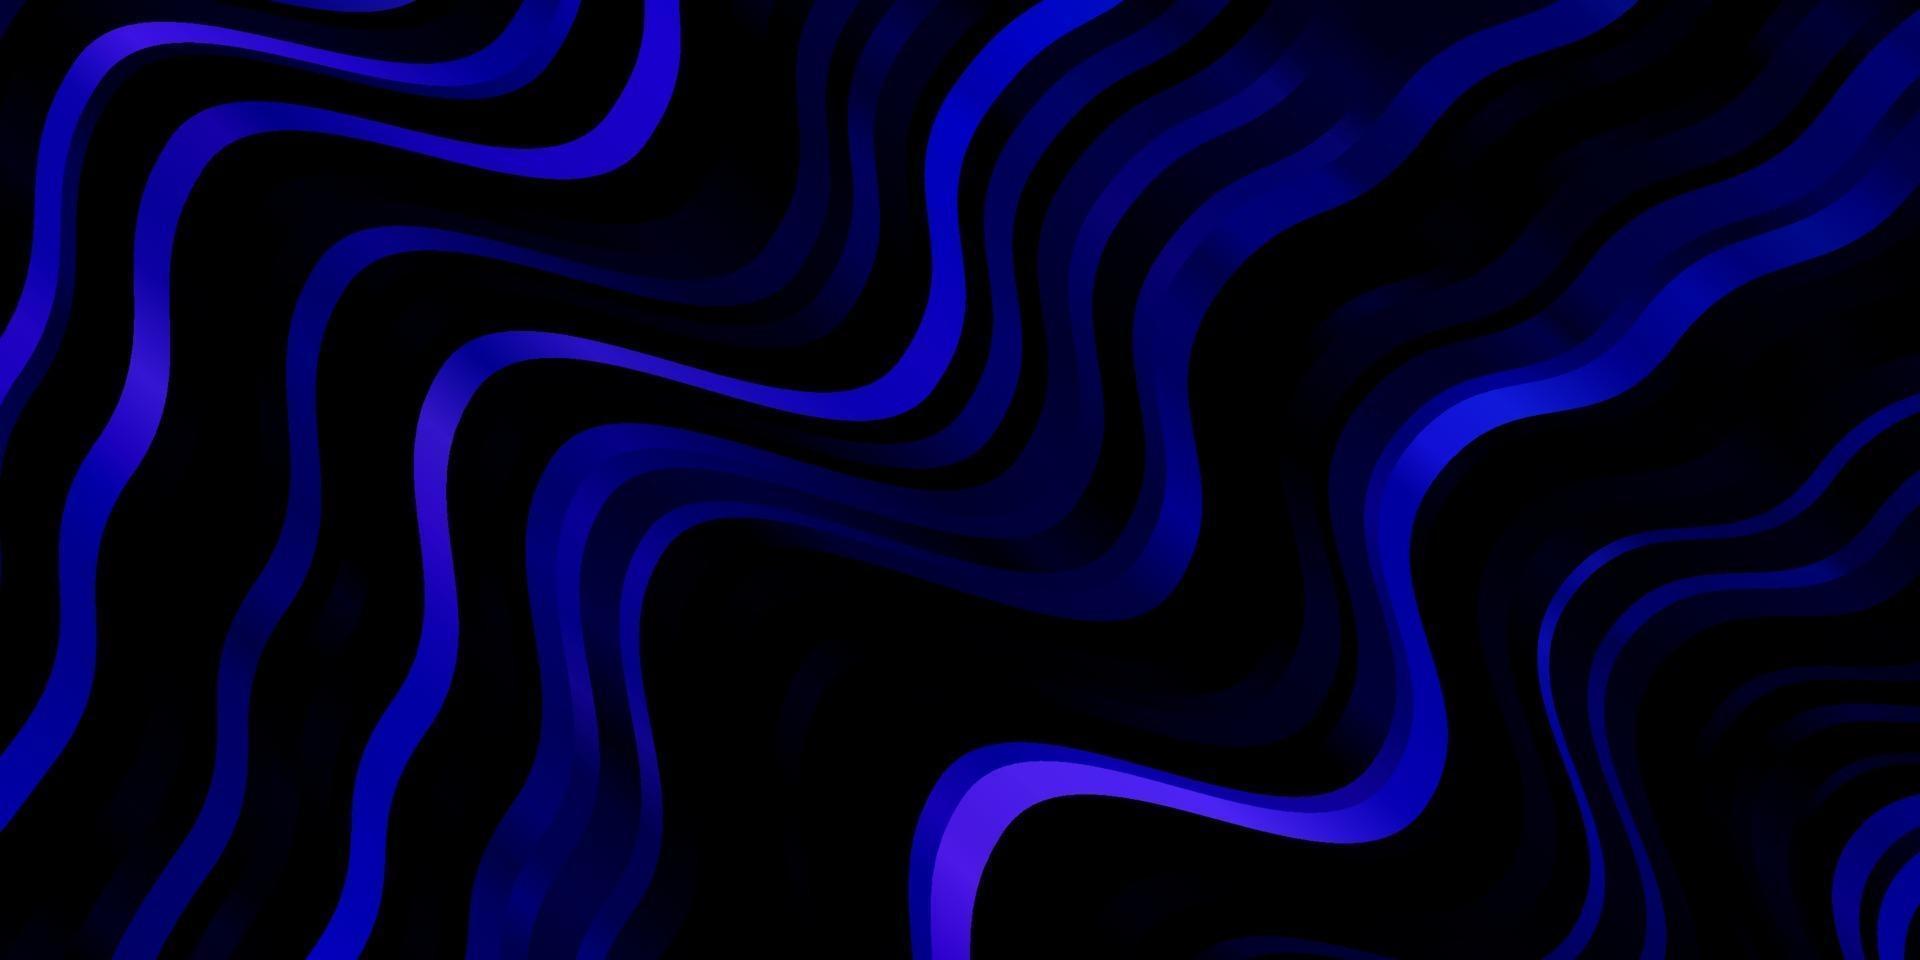 Dark Pink, Blue vector background with lines.